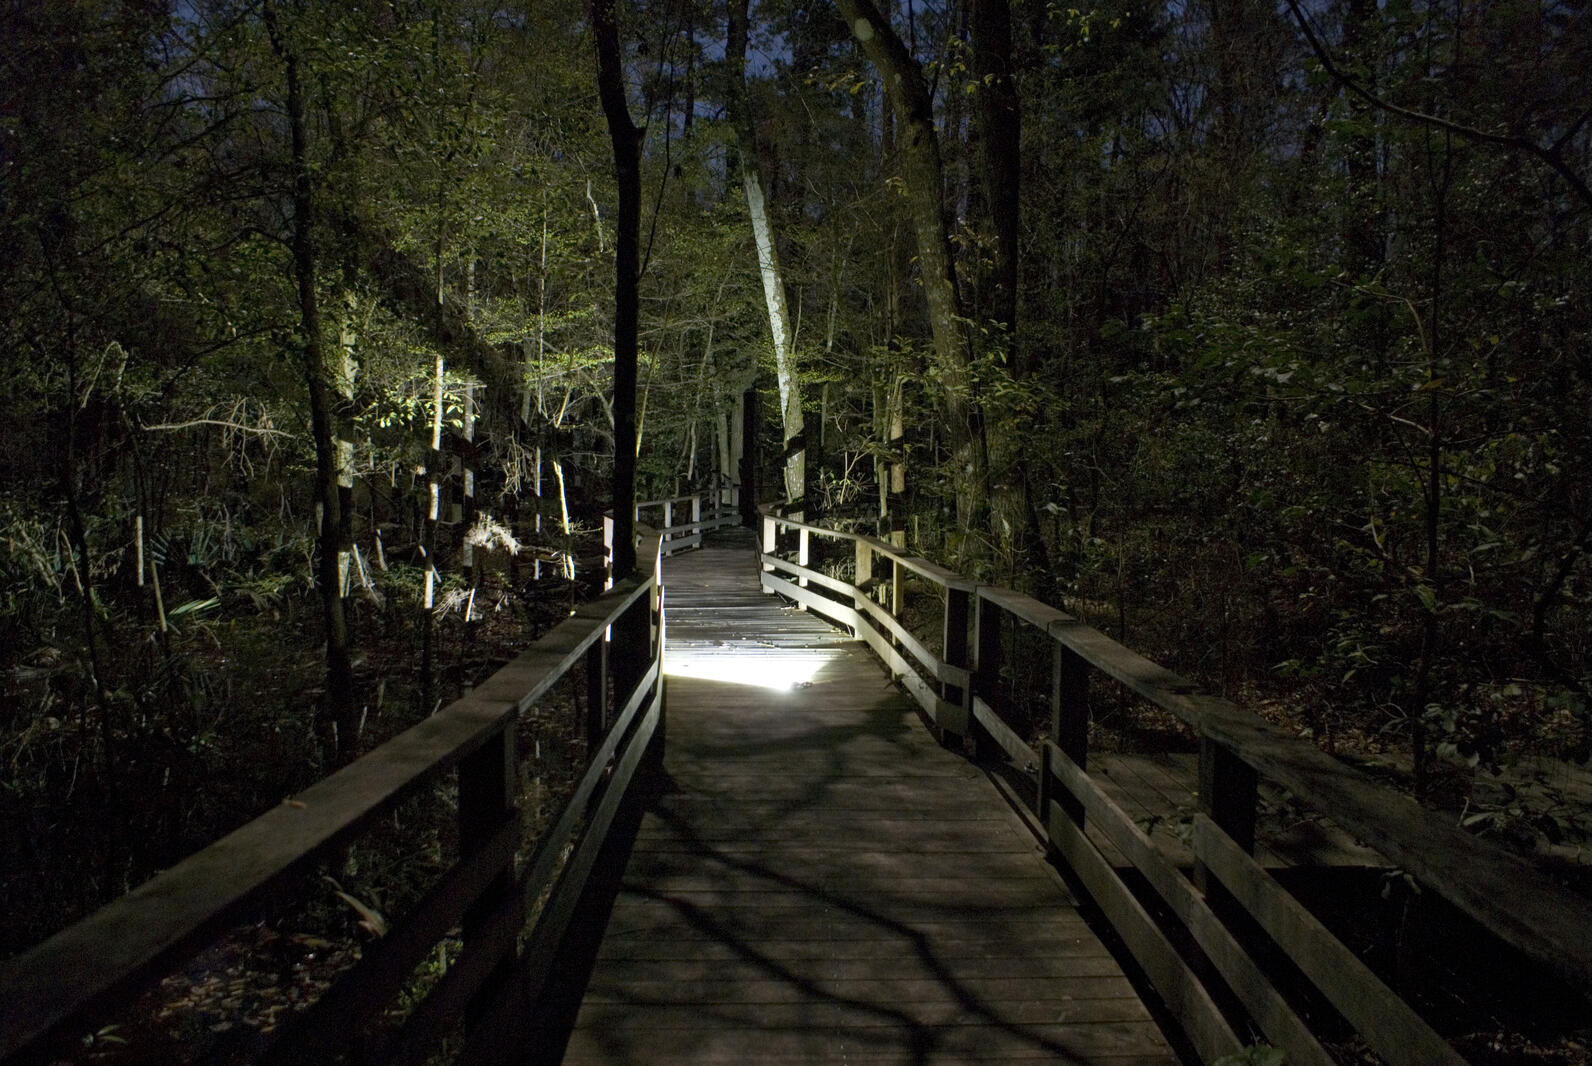 A headlamp rests on the boardwalk at night, illuminated the lush trees on either side and casting shadows of the railing up onto their leaves.